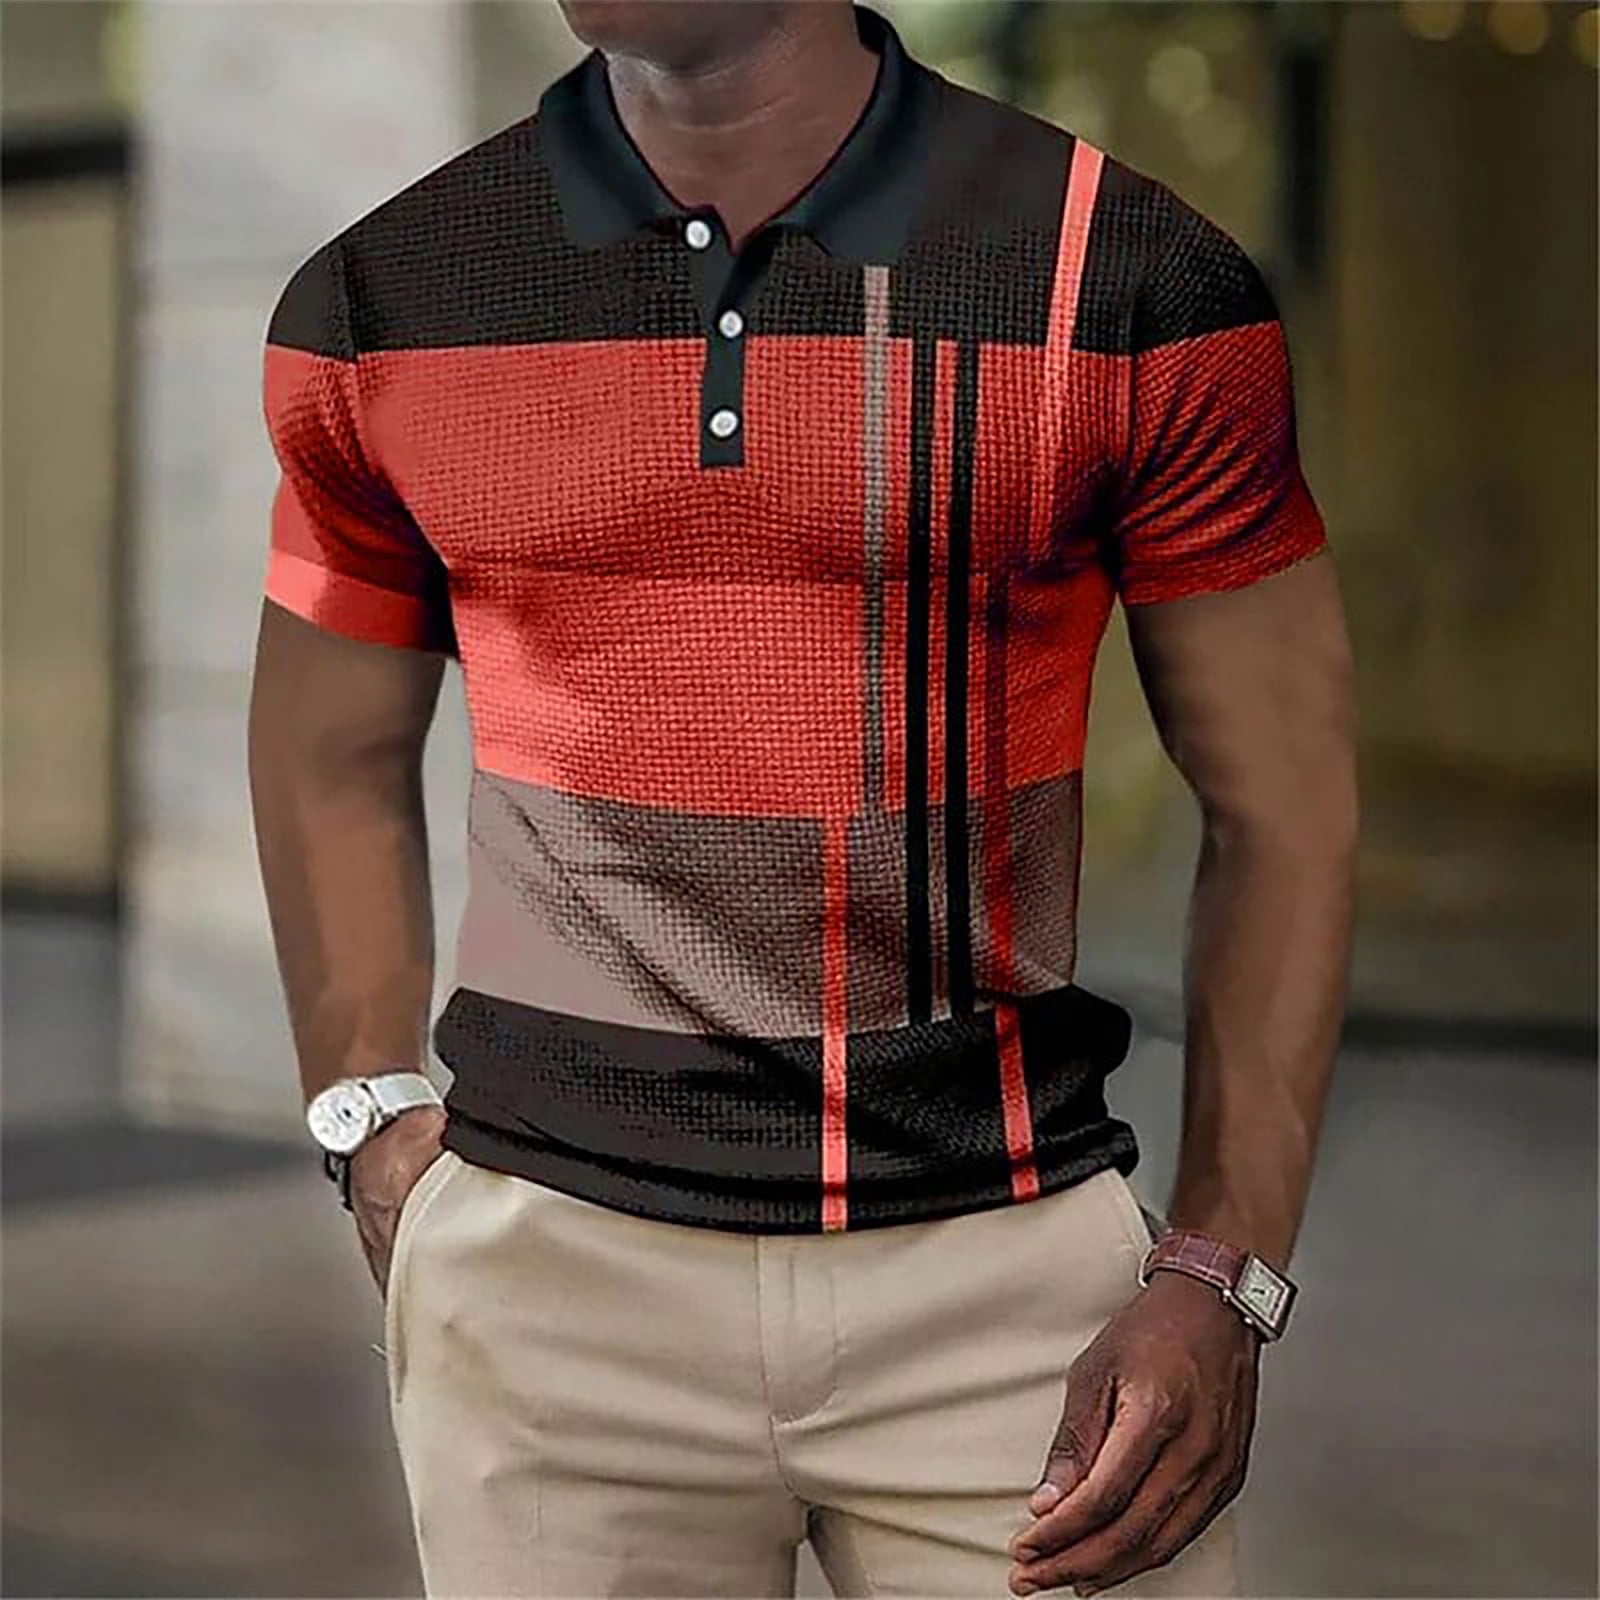 Golf Shirts for Men Dry Fit Performance Print Short Sleeve